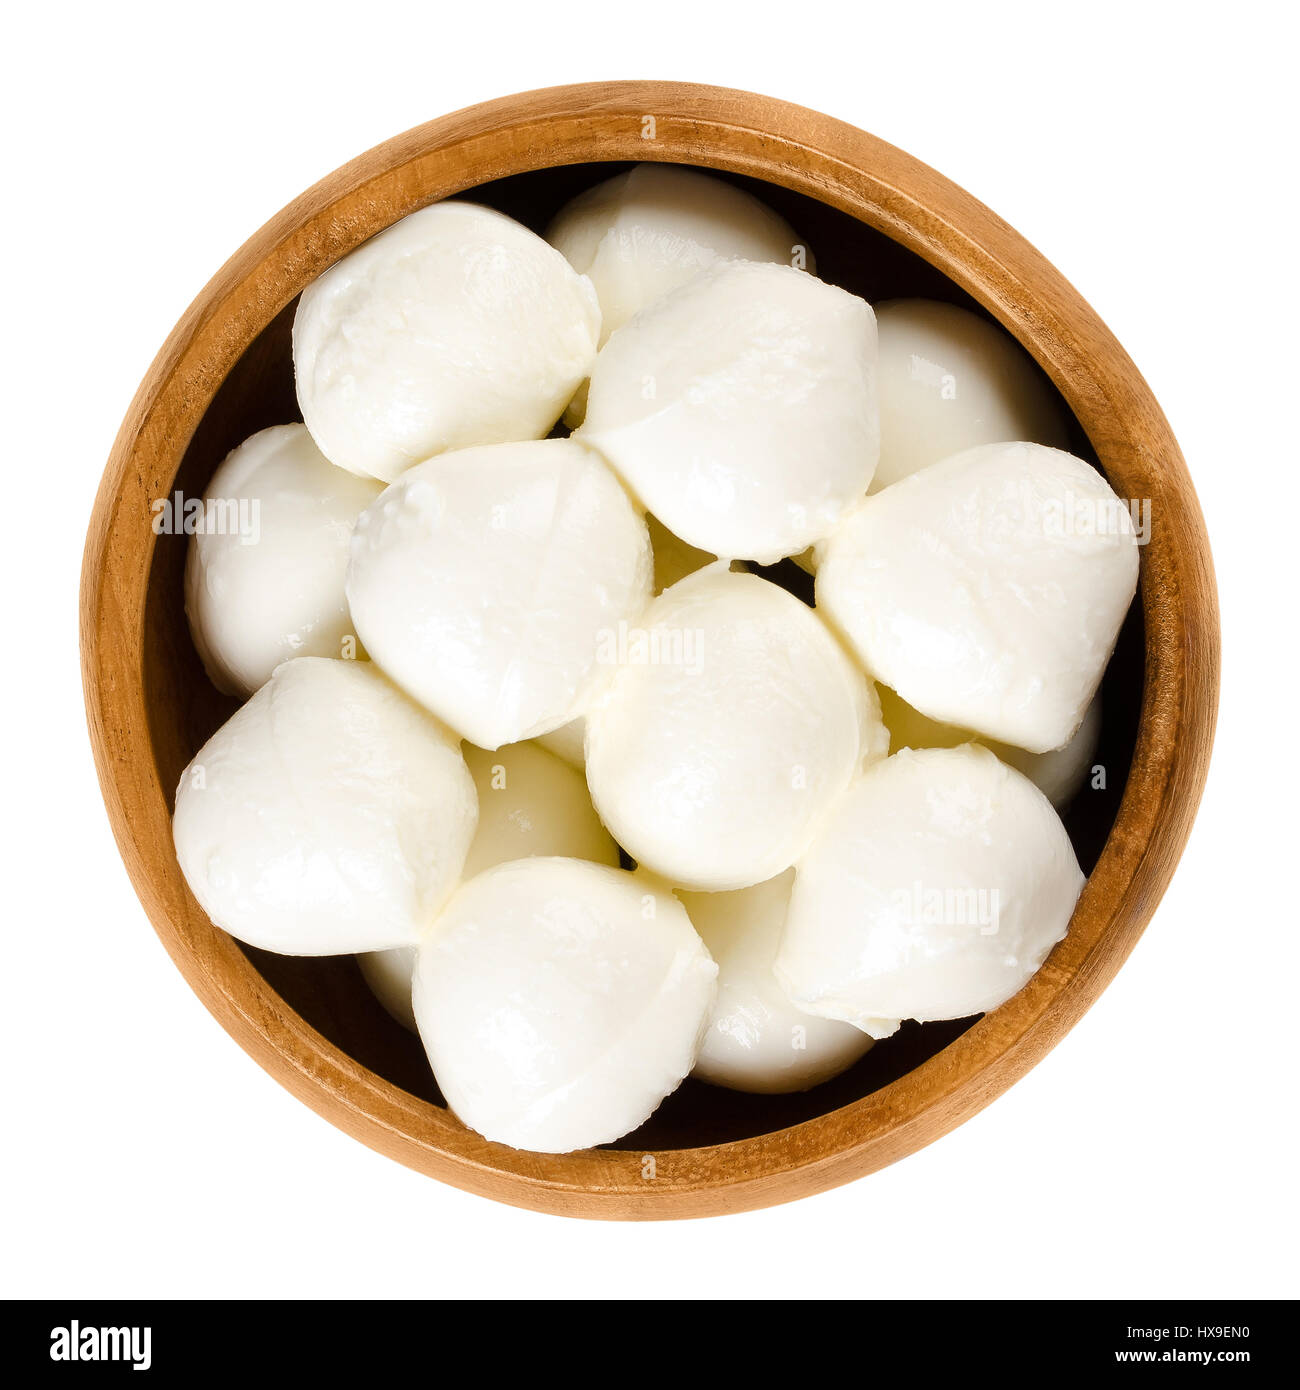 Small mozzarella balls in wooden bowl. Fresh white southern Italian cheese made from milk by the pasta filata method, also called bambini bocconcini. Stock Photo